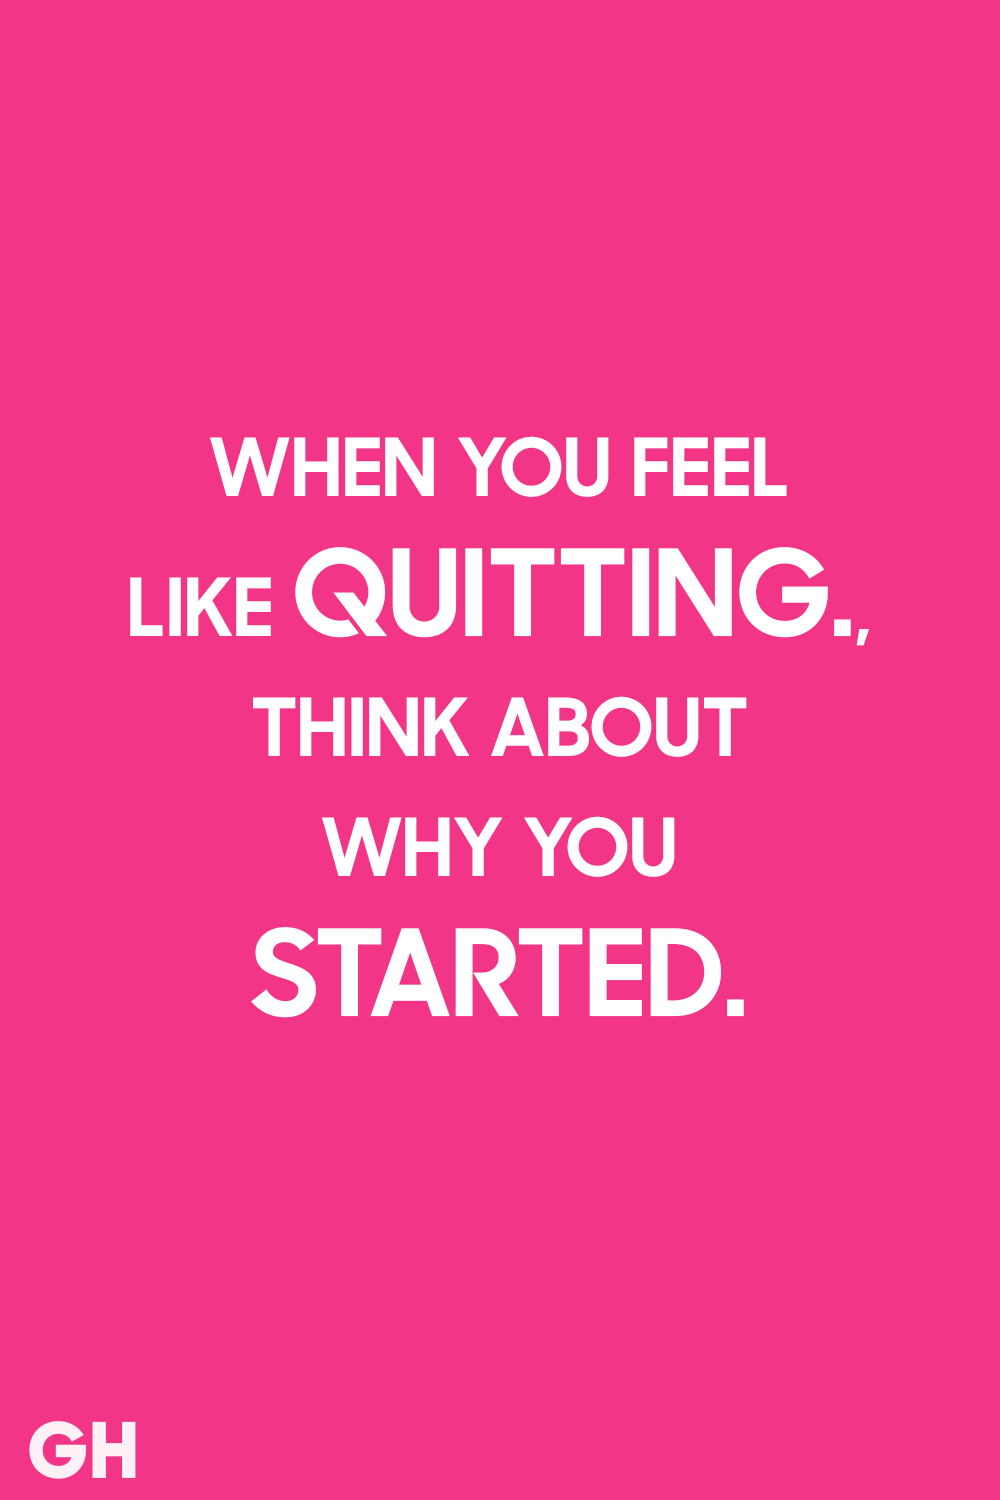 when you feel like quitting, think about why you started